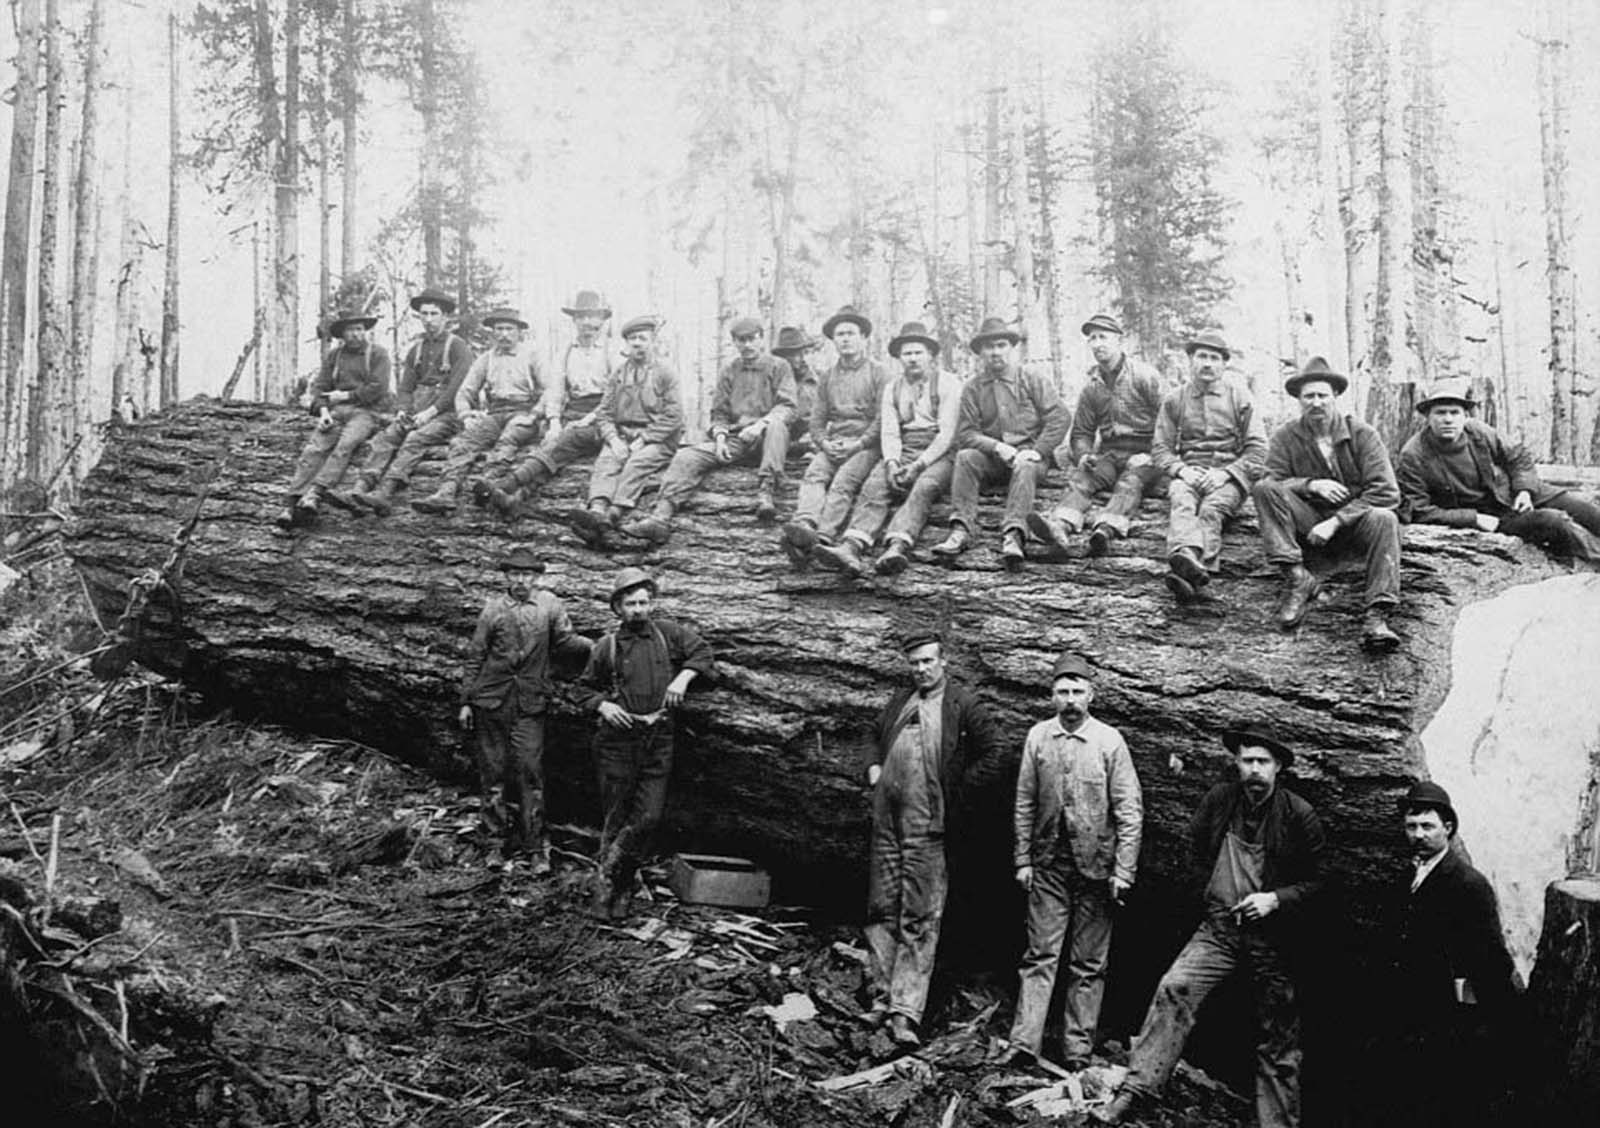 The lumberjacks would often leave their families and live in camps where hundreds of their fellow workers relaxed between grueling shifts.